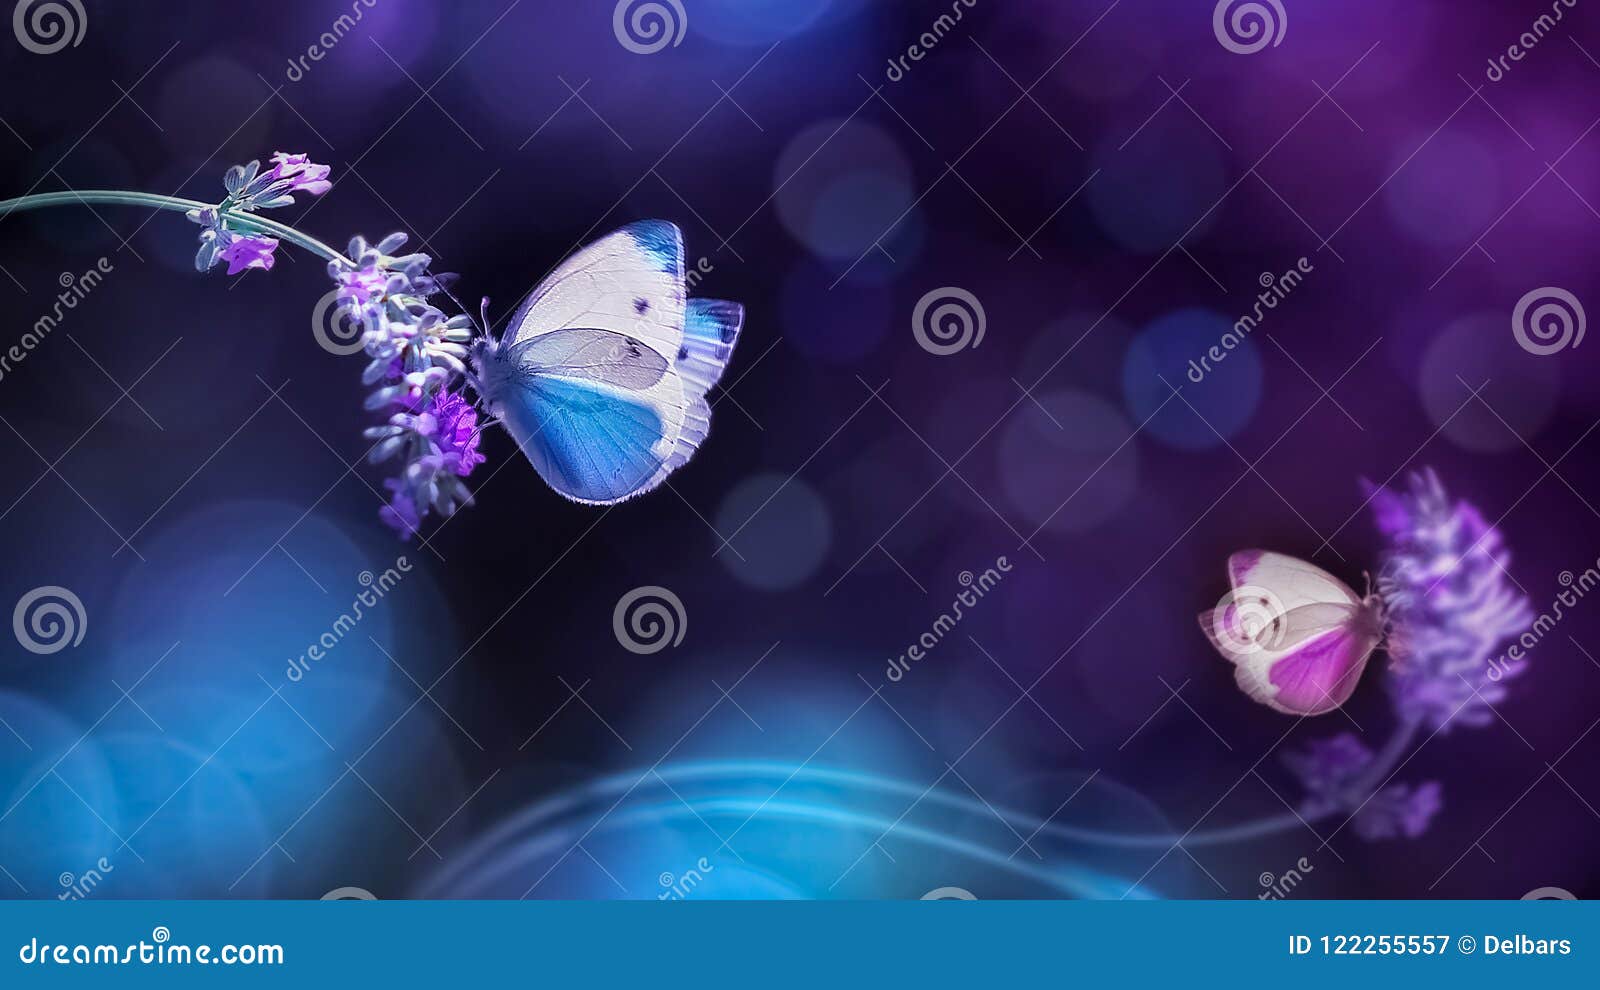 beautiful white blue butterflies on the flowers of lavender. summer spring natural image in blue and purple tones.